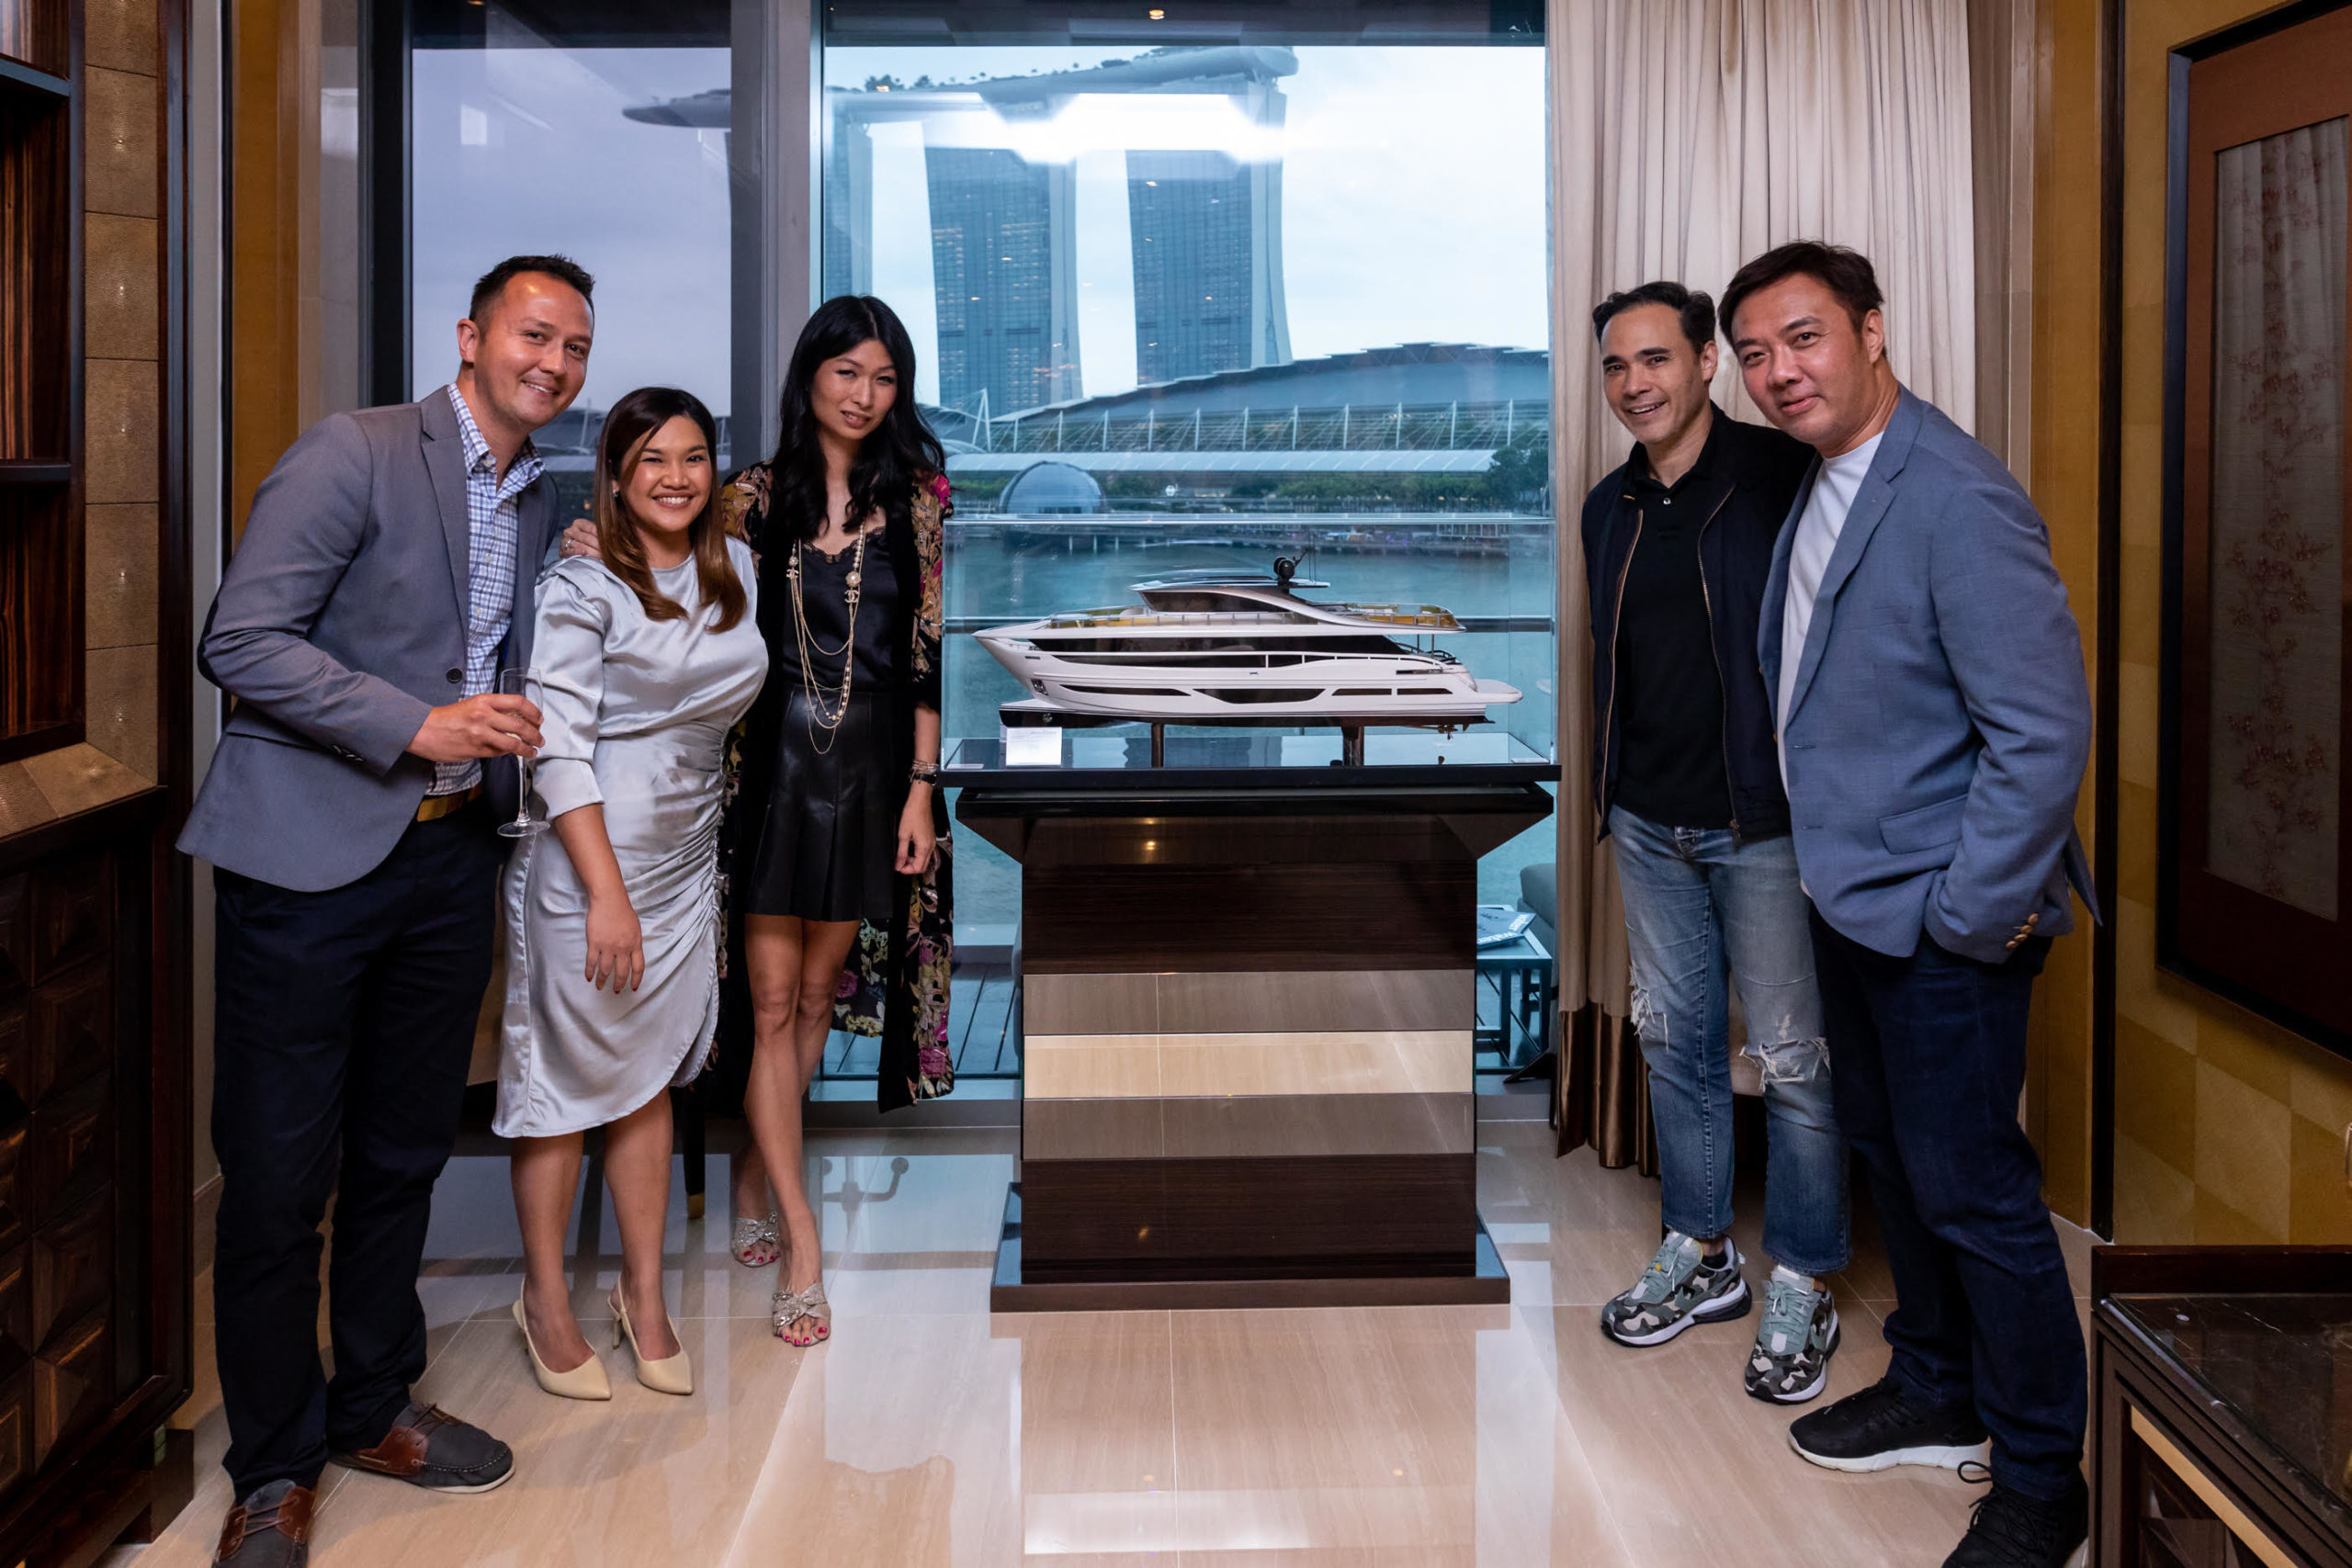 Princess Yachts South East Asia partnership with Amber Lounge arranging ultimate yachting experience for the VIPs during Singapore Grand Prix 2022